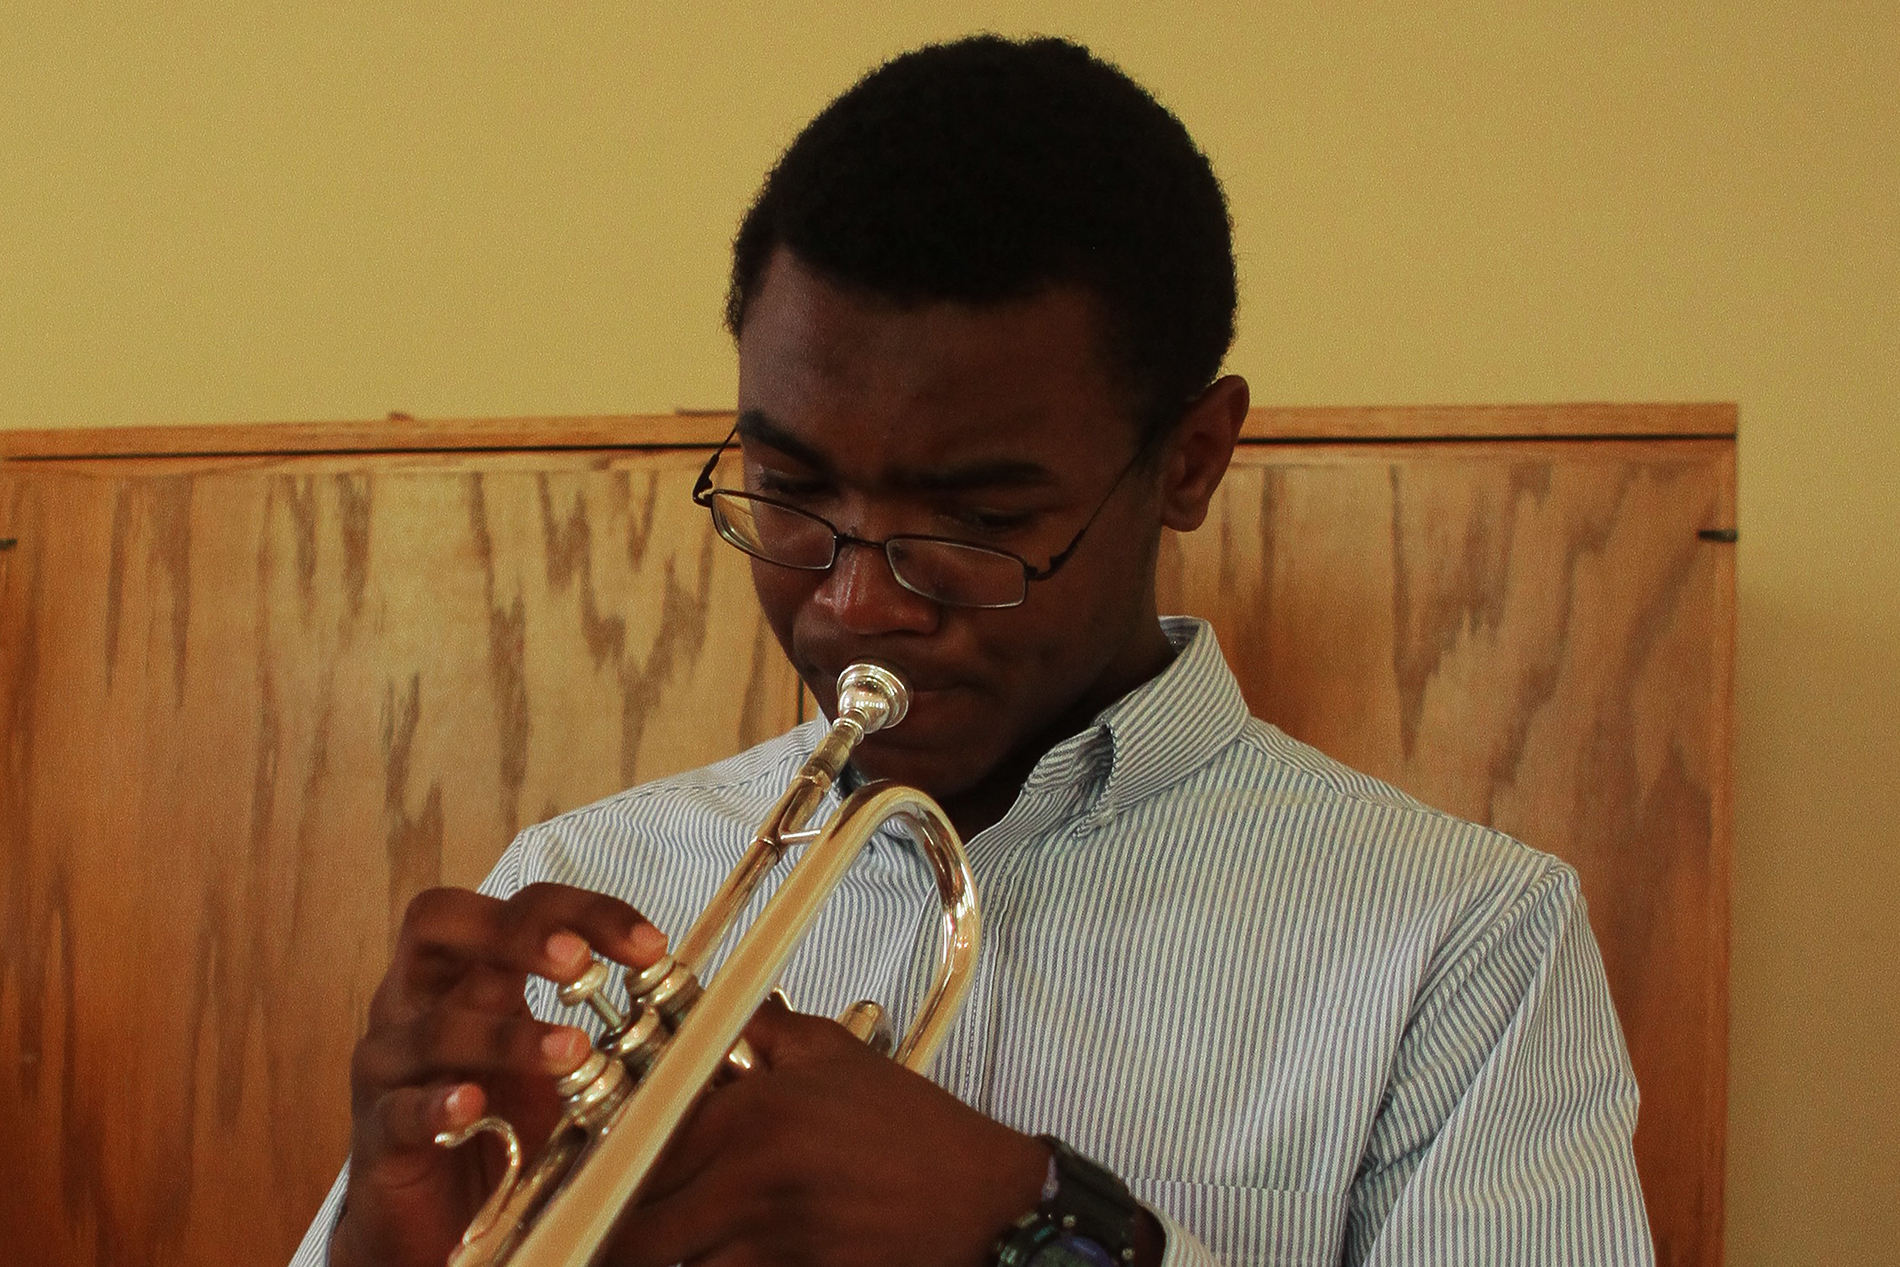 a young man plays the trumpet